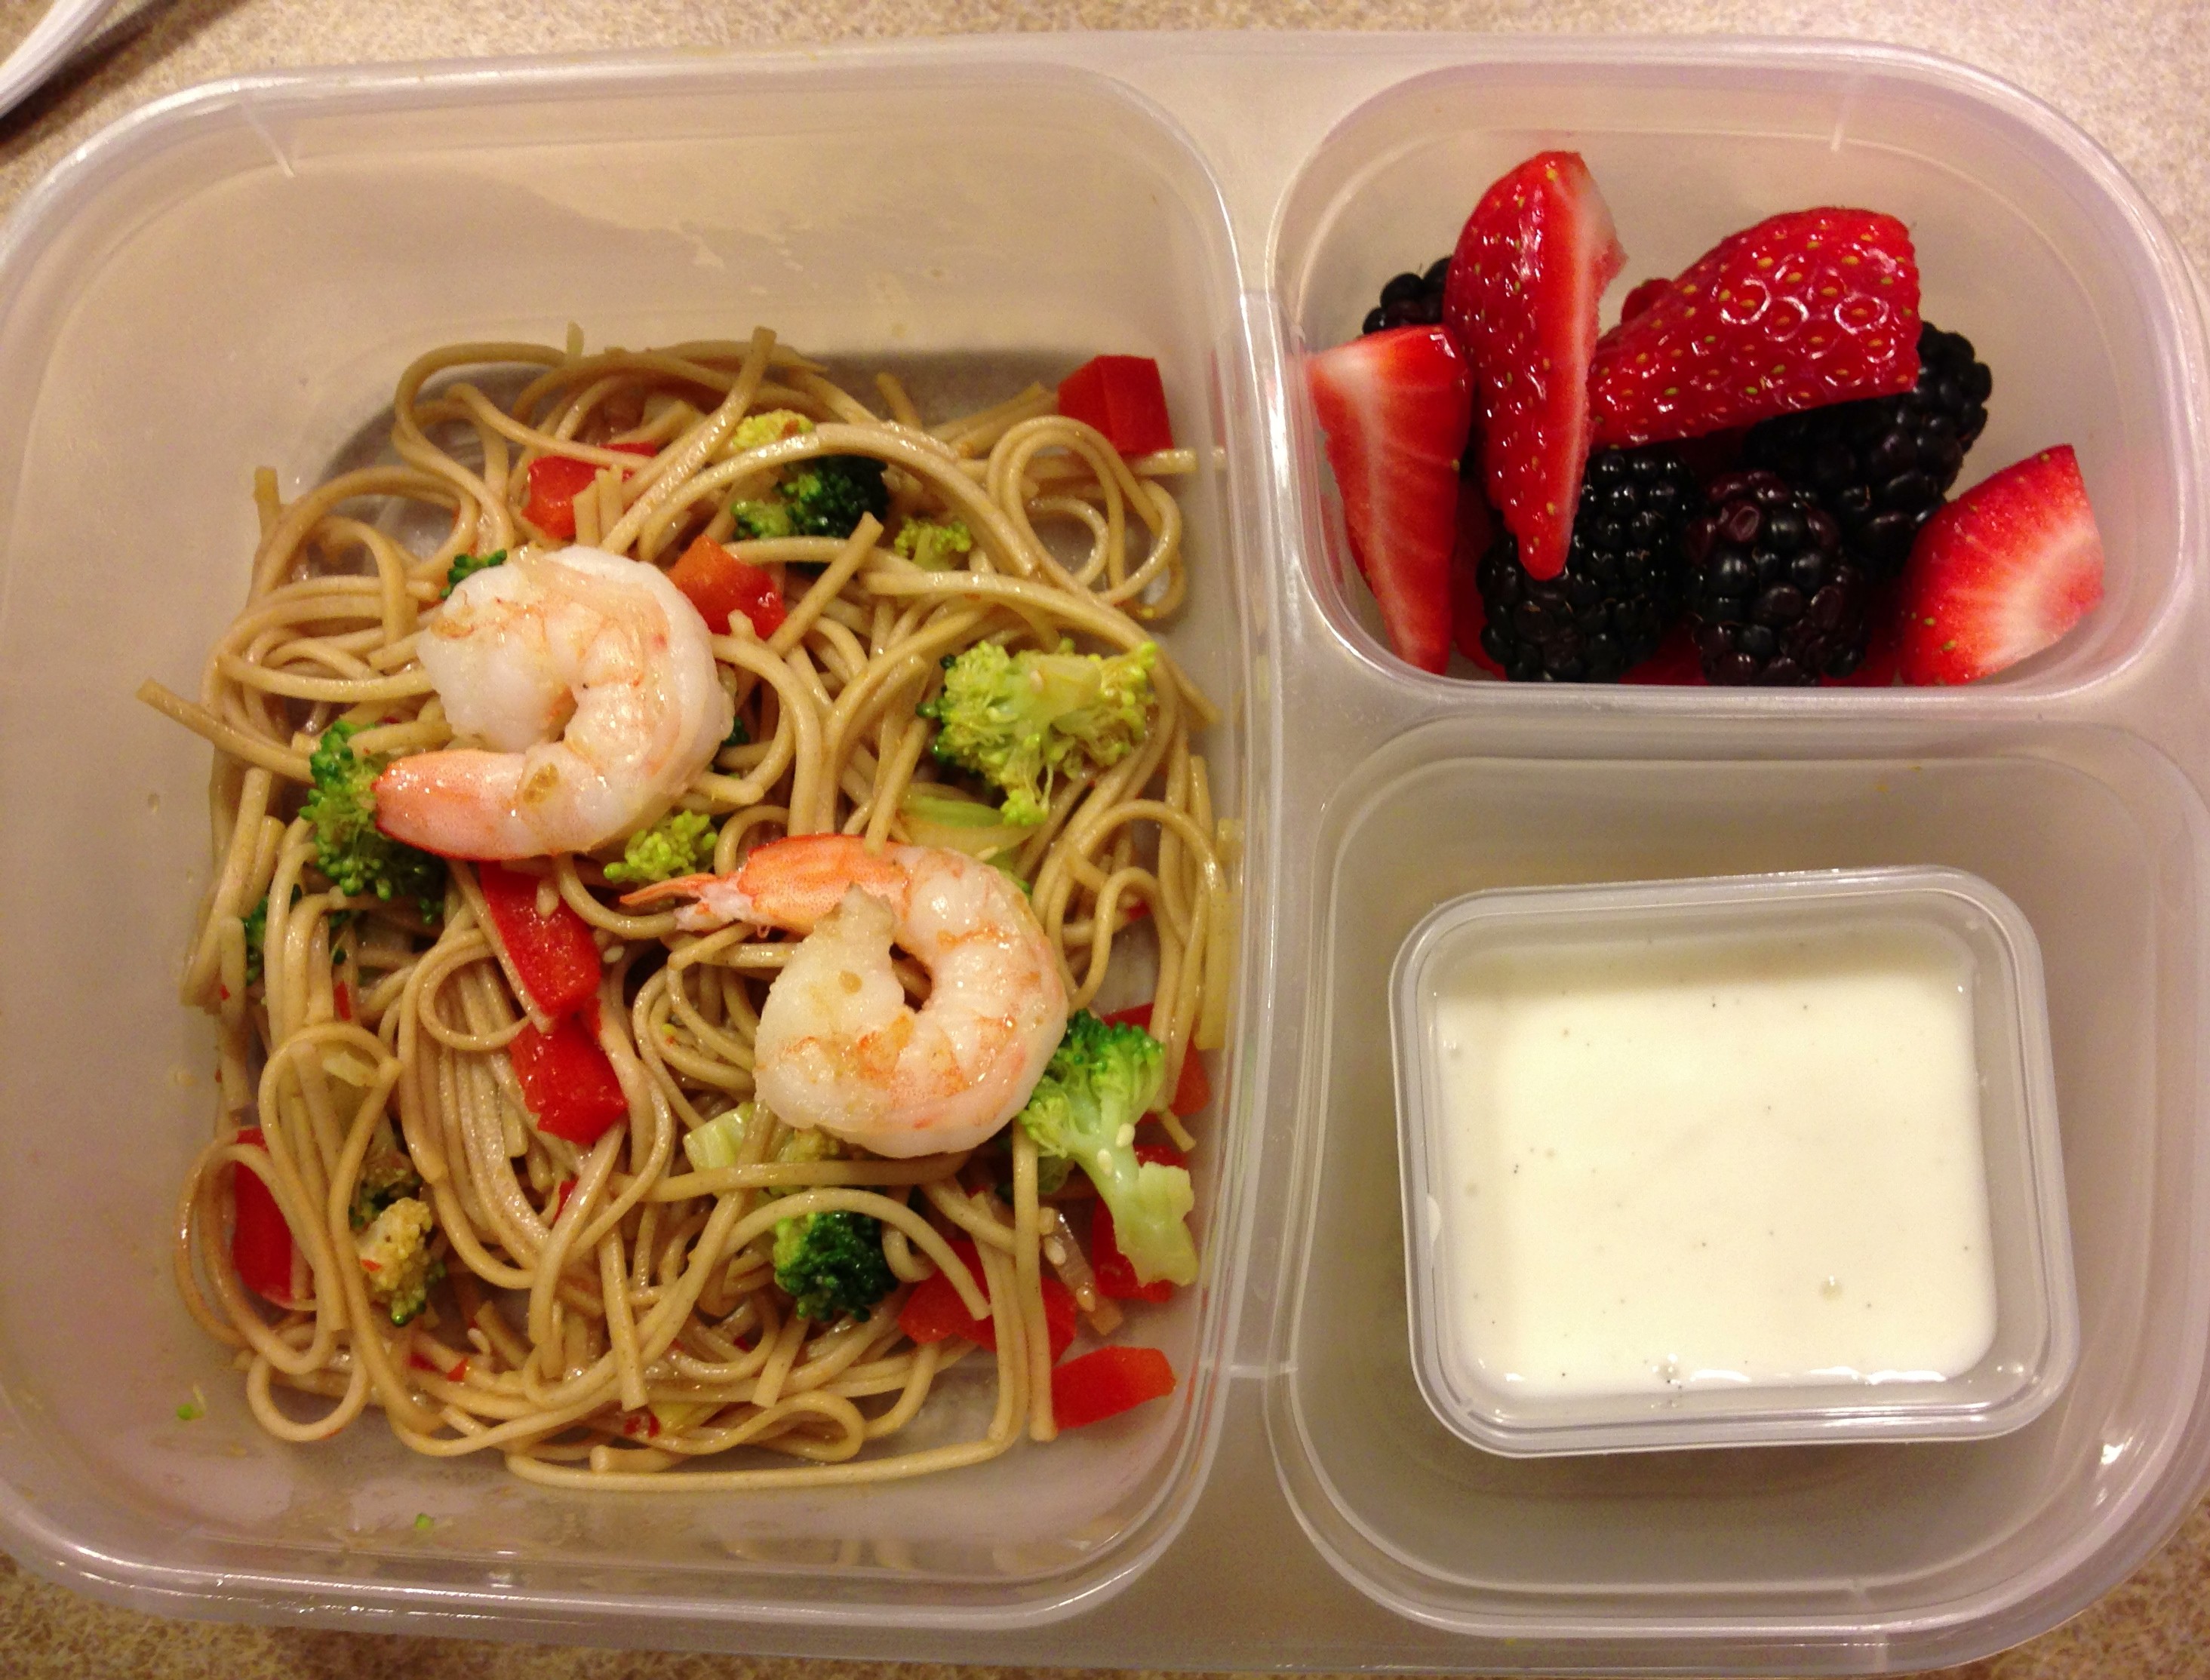 Leftover Spicy Soba Noodles with broccoli, leeks, red bell pepper and shrimp, vanilla bean yogurt and strawberries and blackberries